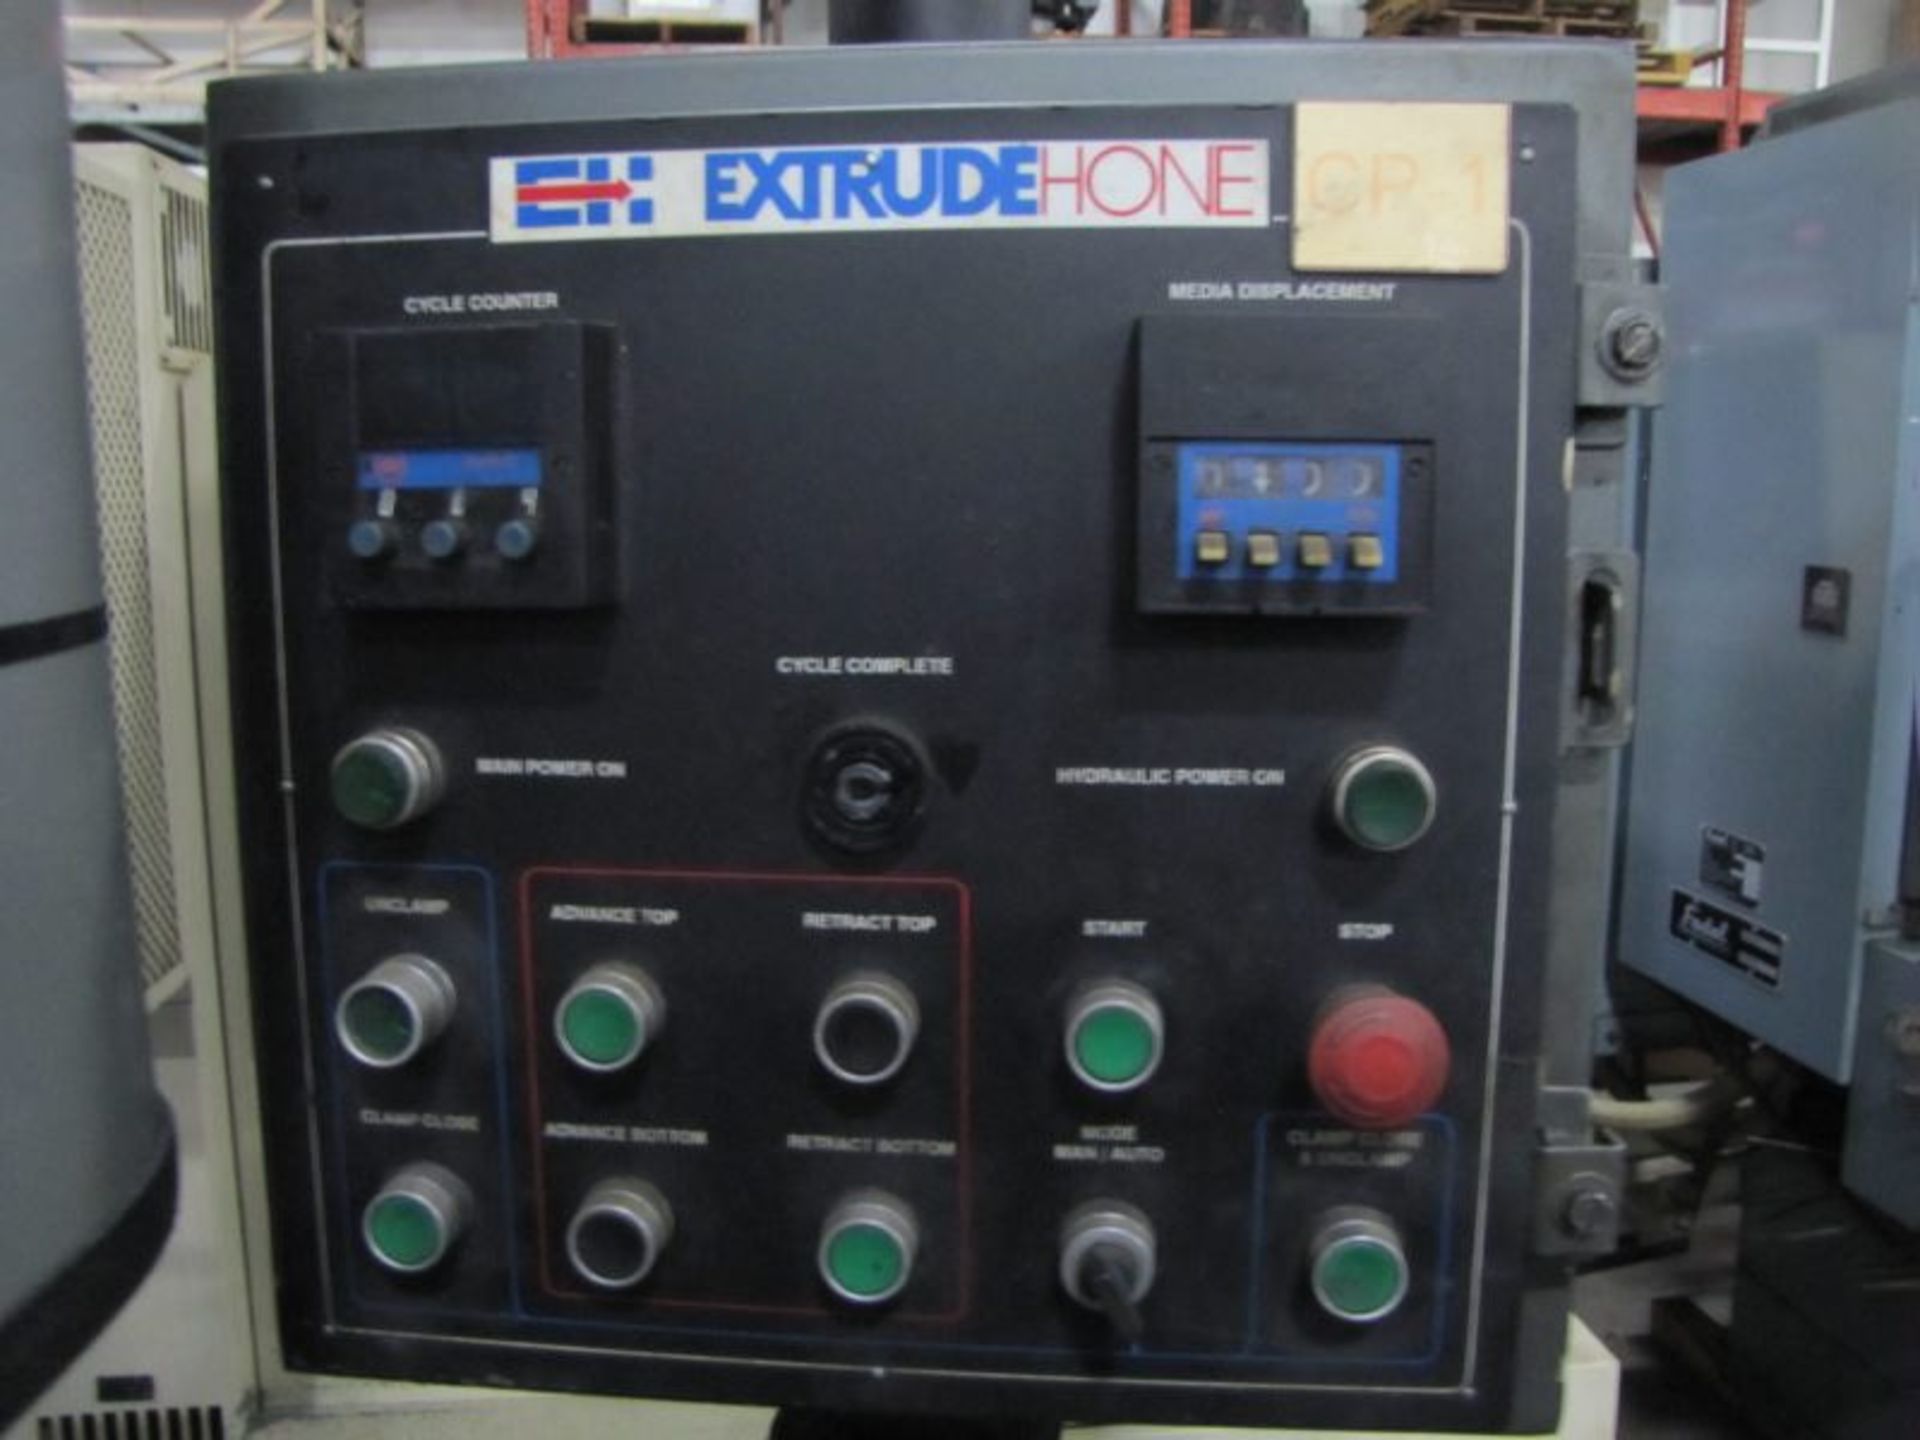 EXTRUDE HONE Vector-8/6 Abrasive Flow Deburring and Polishing Machine, S/N: R95-0839, MFG. 1995, - Image 7 of 11